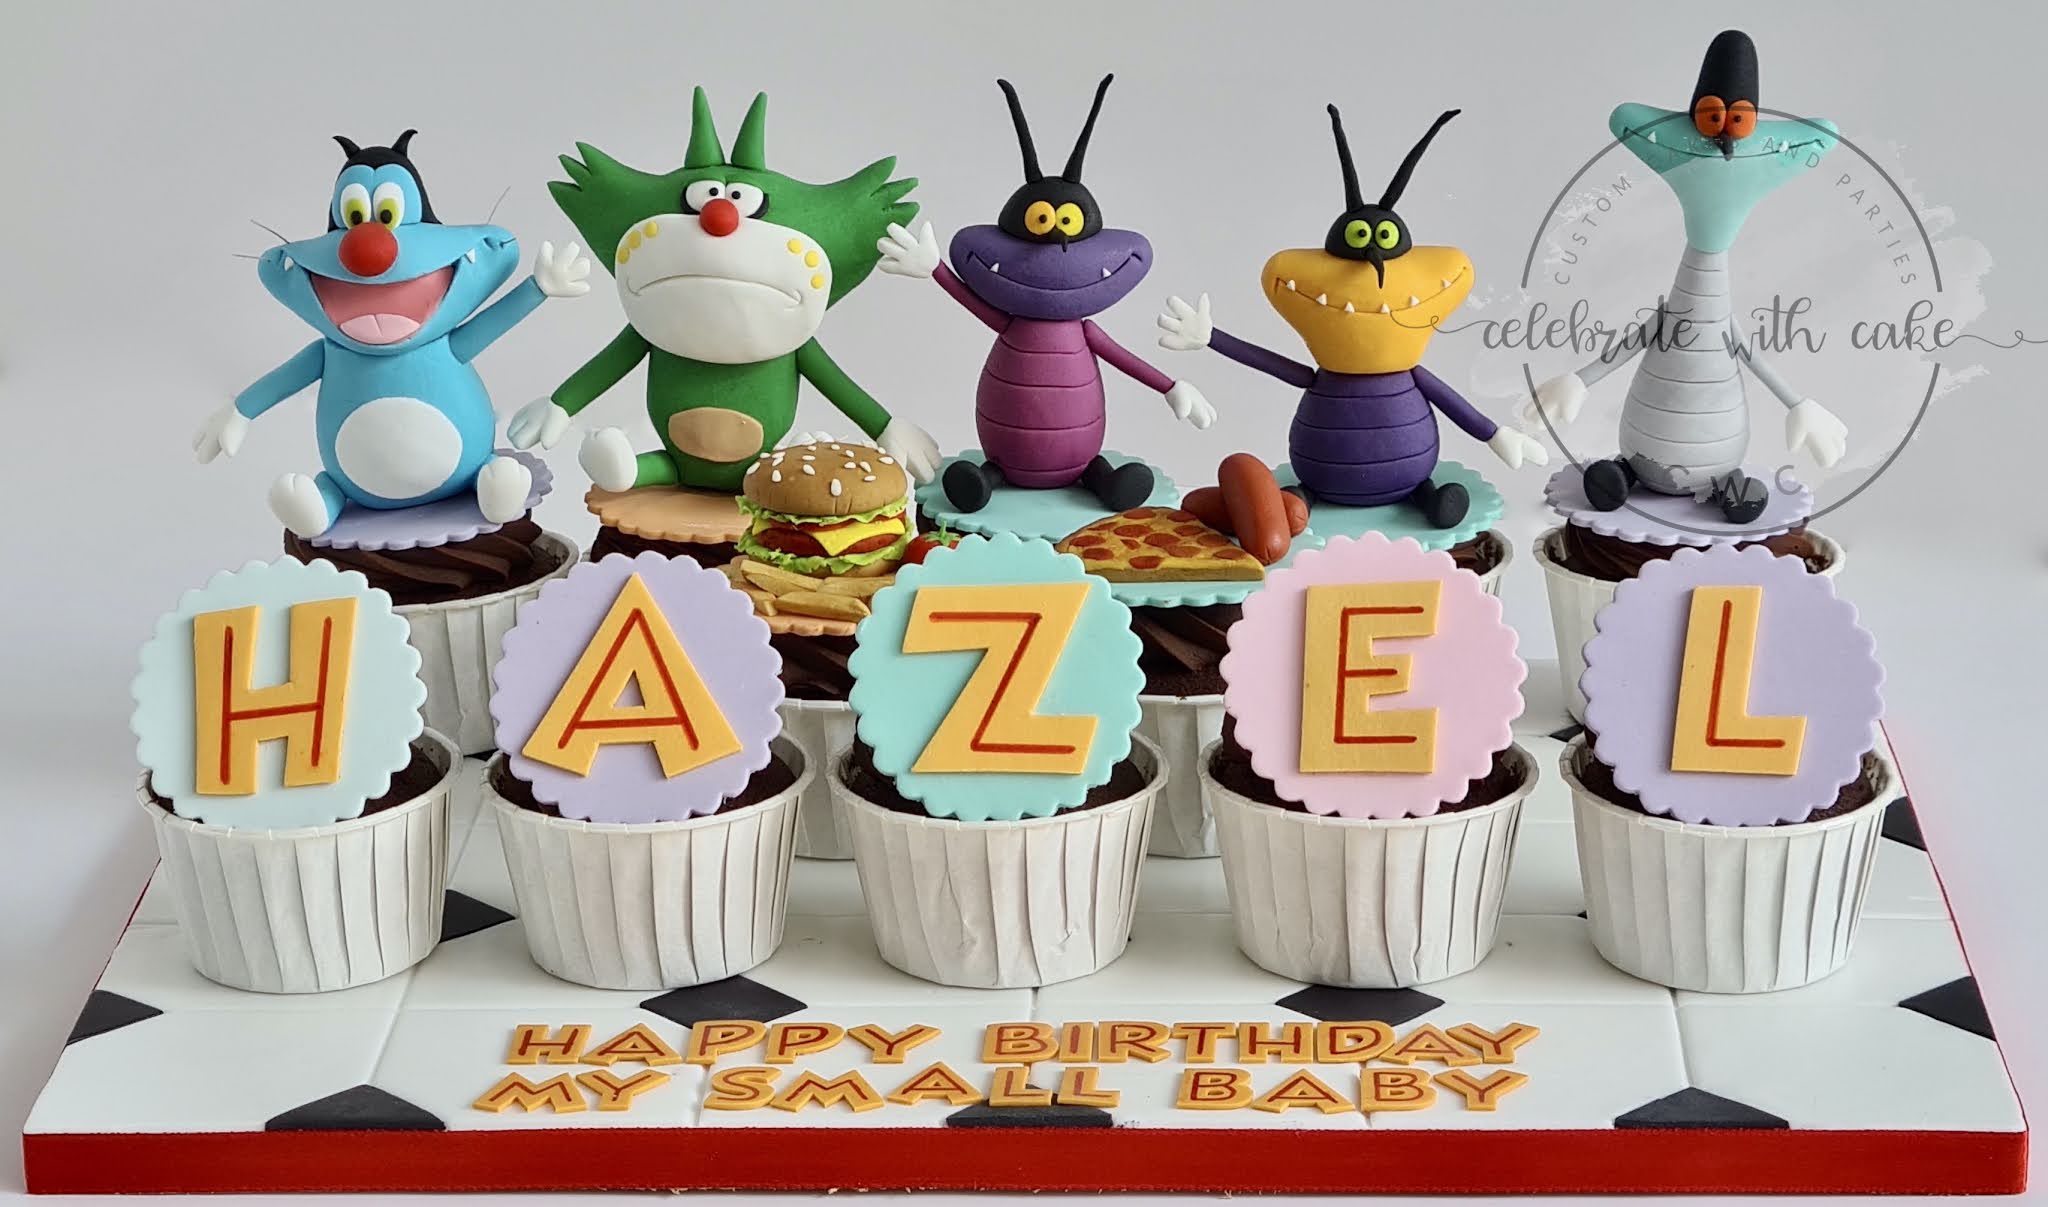 Celebrate with Cake!: Oggy and the Cockroaches Cupcakes